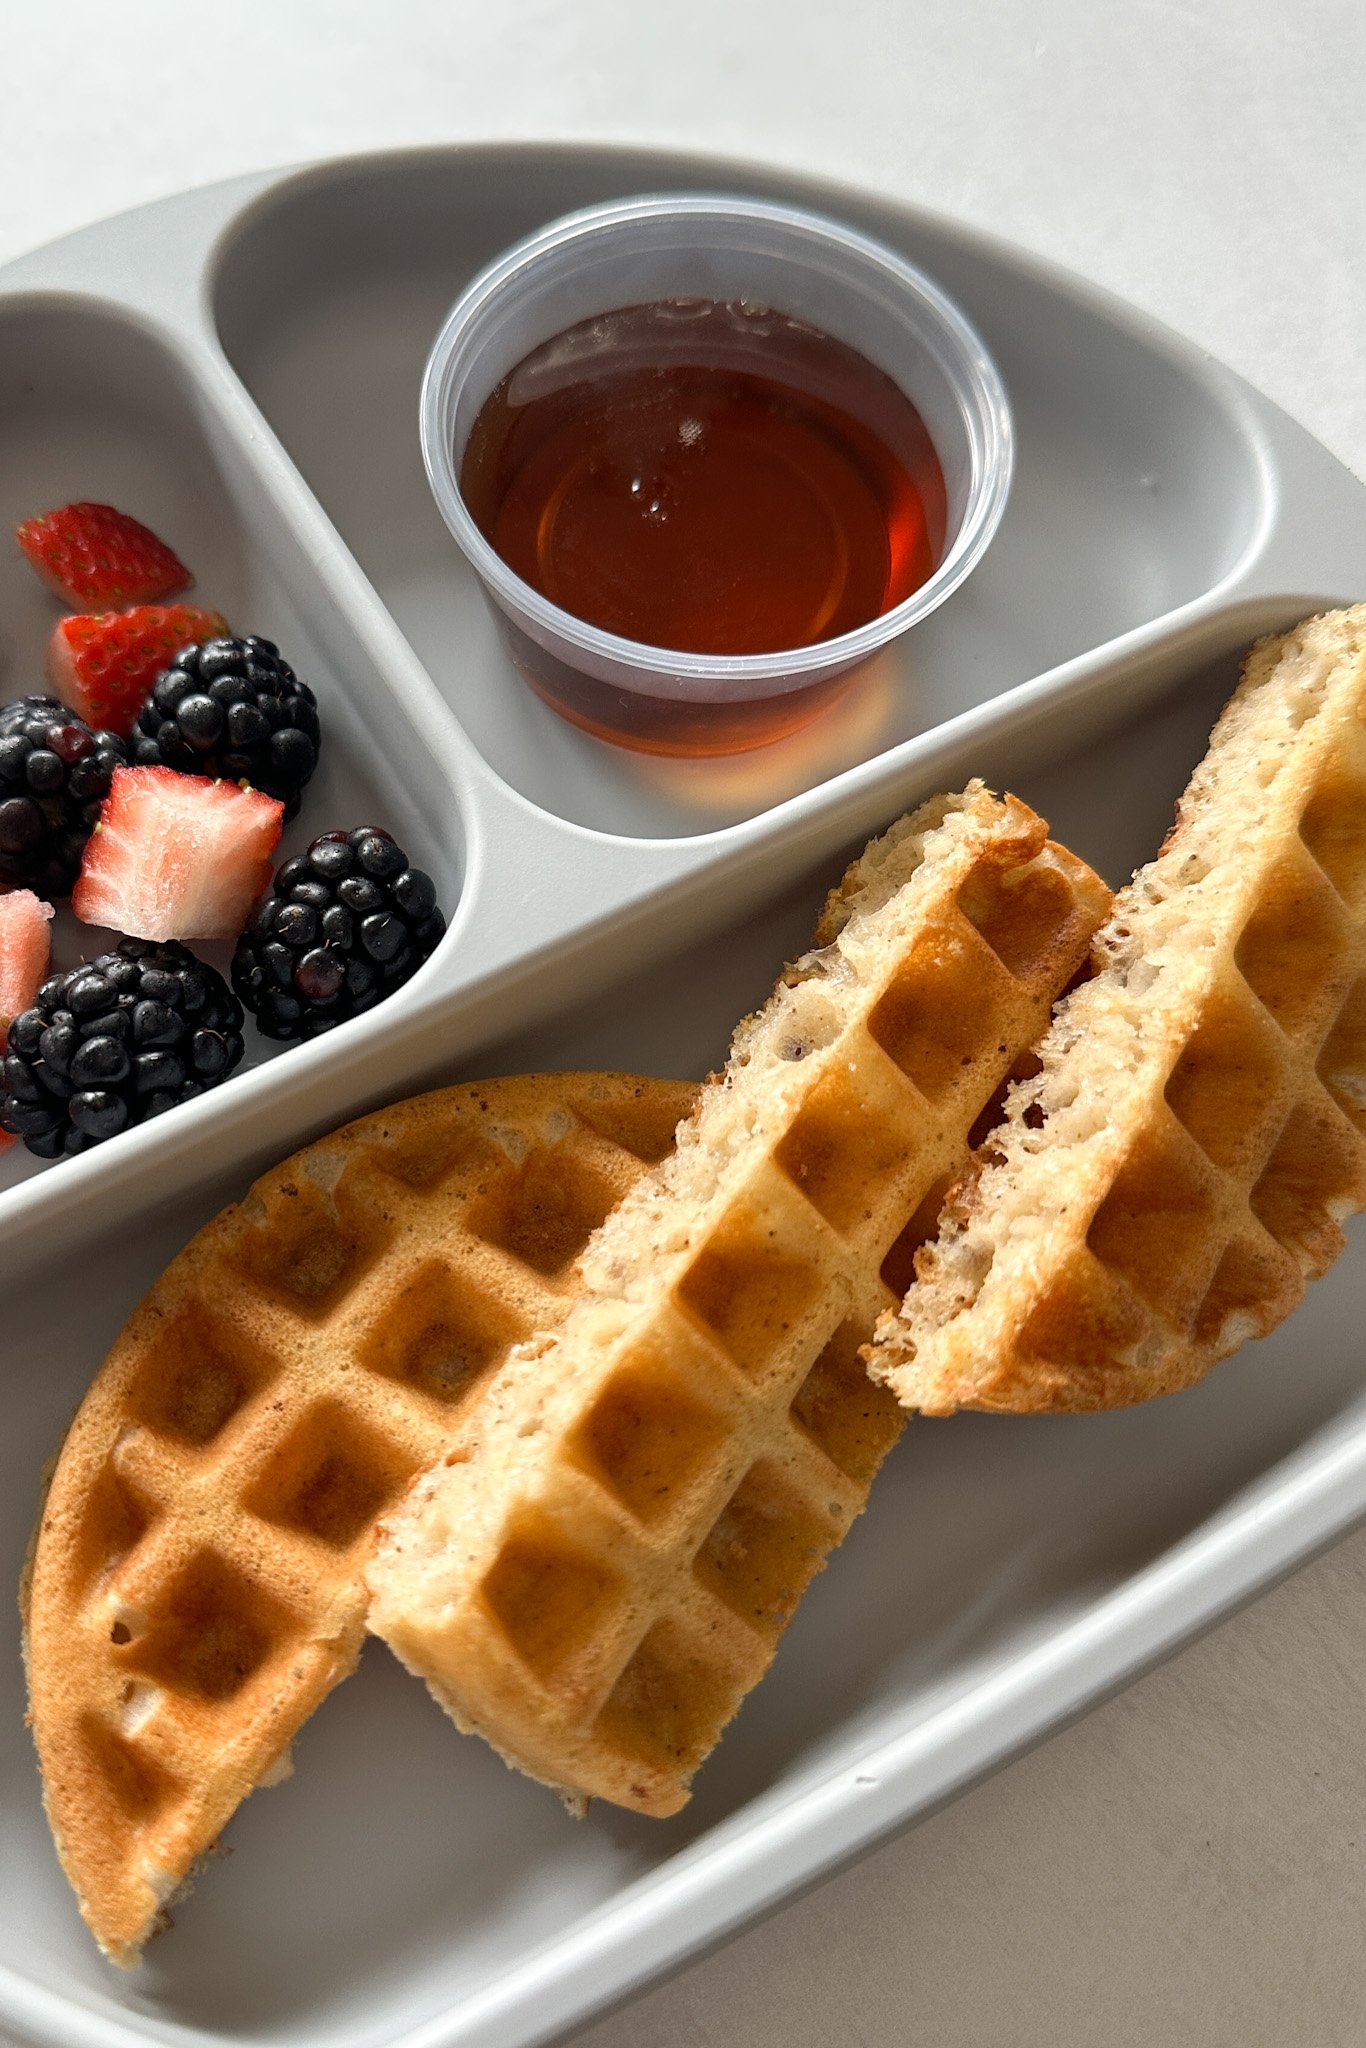 Eggless waffles served with berries and maple syrup.